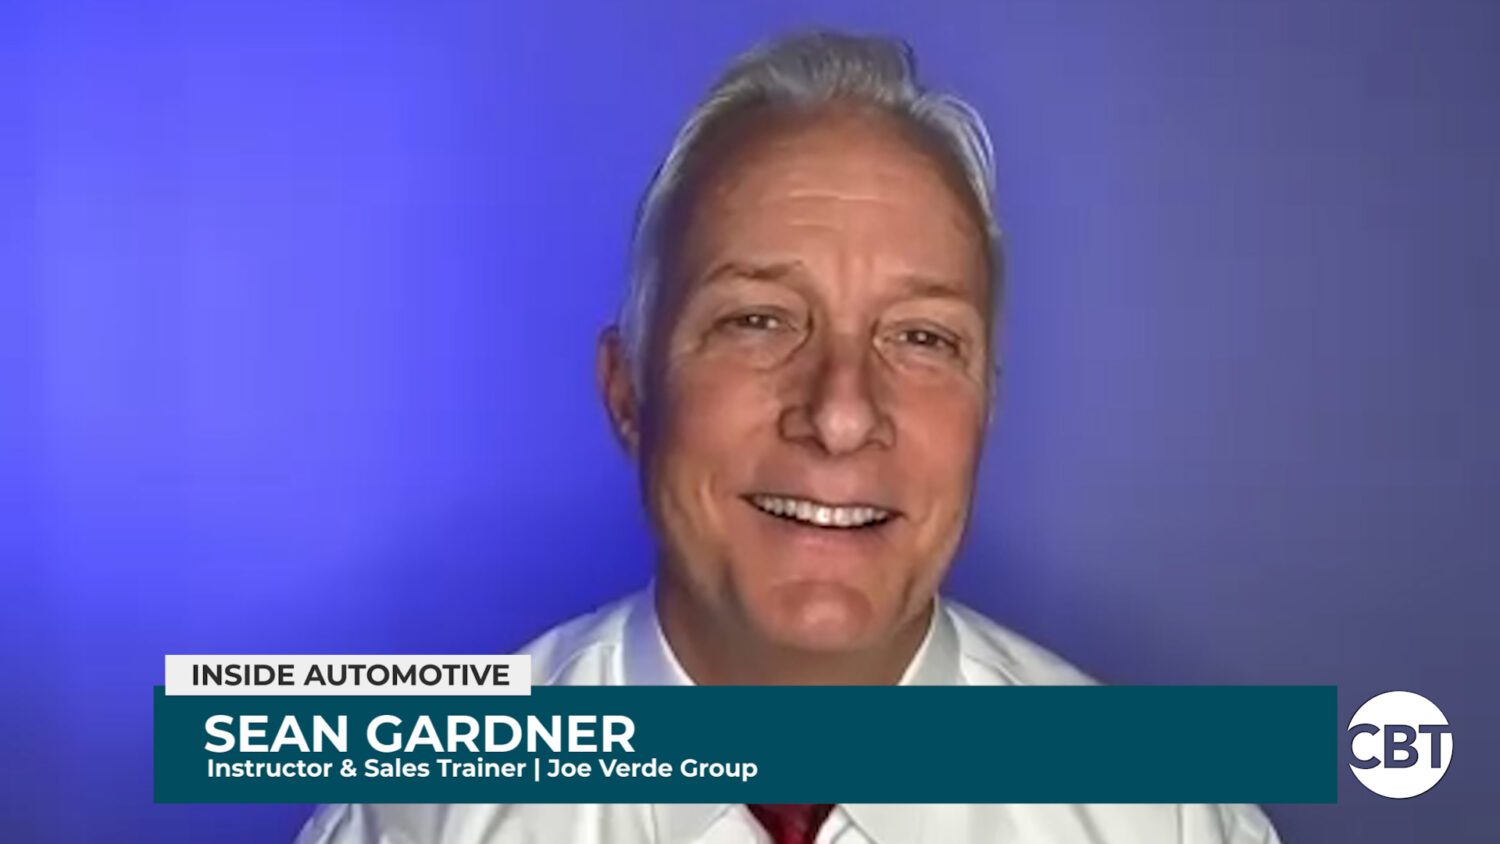 Sean Gardner joins Inside Automotive to discuss two complicated issues: negative equity and trade-in customers.